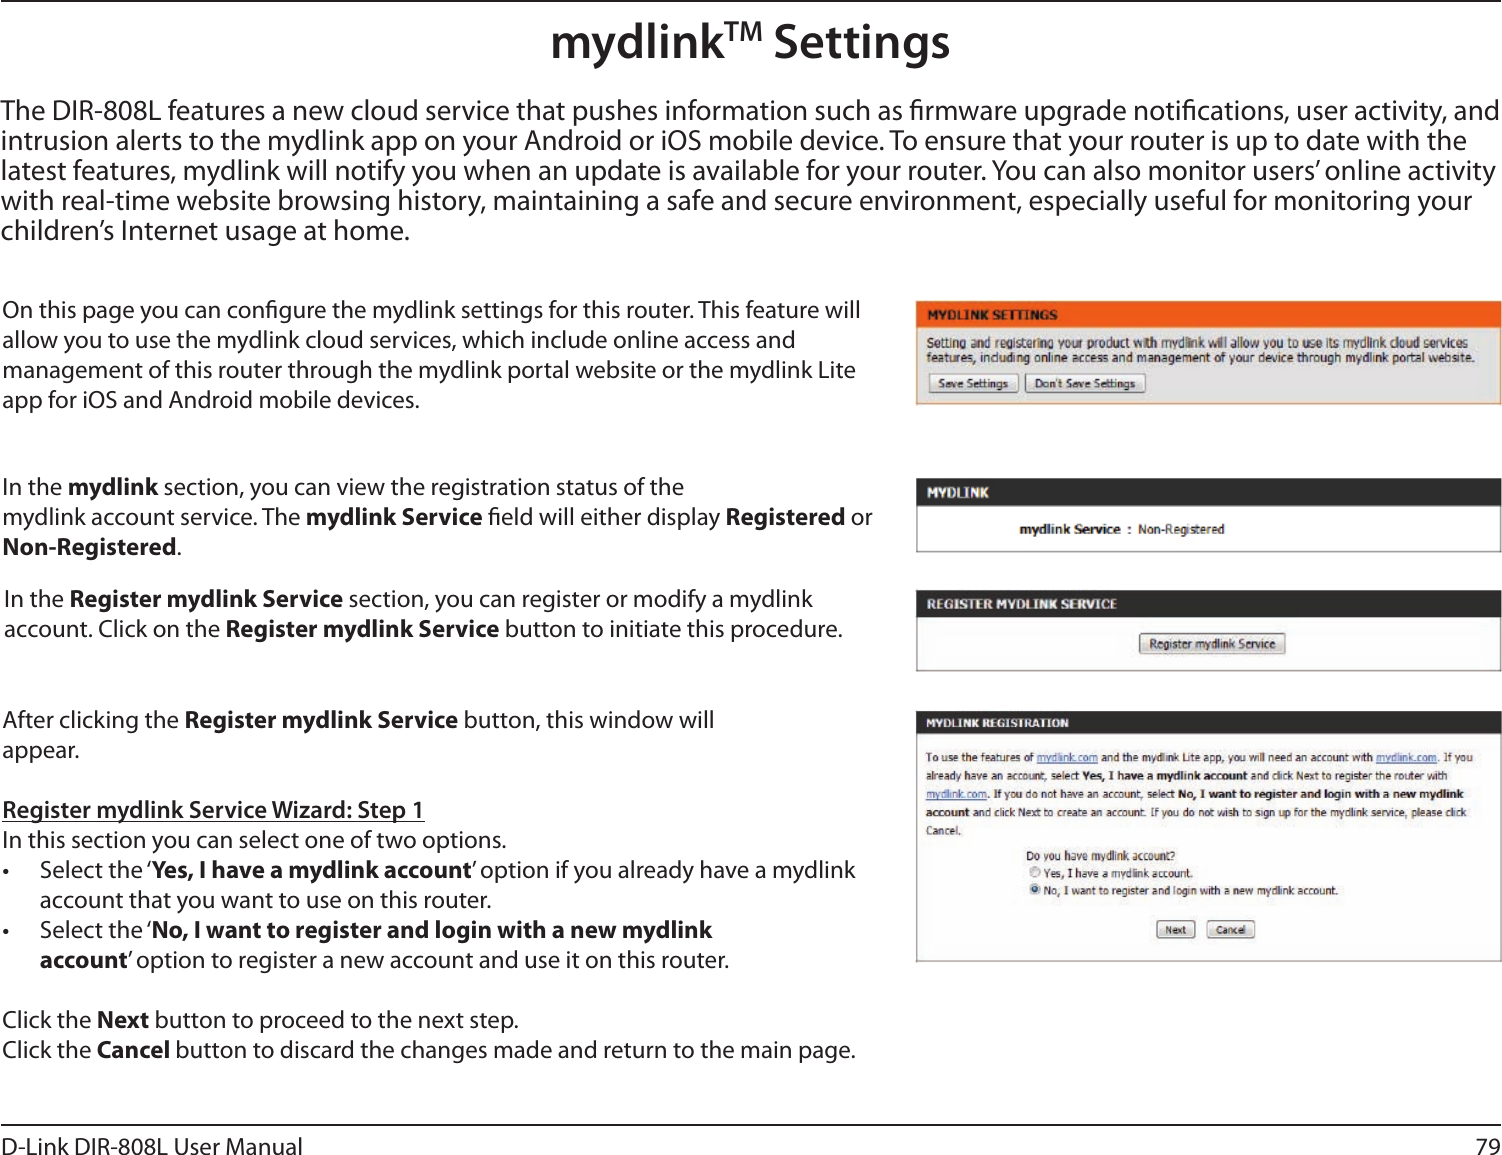 79D-Link DIR-808L User ManualmydlinkTM SettingsOn this page you can congure the mydlink settings for this router. This feature will allow you to use the mydlink cloud services, which include online access and  management of this router through the mydlink portal website or the mydlink Lite app for iOS and Android mobile devices.In the mydlink section, you can view the registration status of the mydlink account service. The mydlink Service eld will either display Registered or Non-Registered.In the Register mydlink Service section, you can register or modify a mydlink account. Click on the Register mydlink Service button to initiate this procedure.After clicking the Register mydlink Service button, this window will appear.Register mydlink Service Wizard: Step 1In this section you can select one of two options.•  Select the ‘Yes, I have a mydlink account’ option if you already have a mydlink account that you want to use on this router. •  Select the ‘No, I want to register and login with a new mydlink account’ option to register a new account and use it on this router.Click the Next button to proceed to the next step. Click the Cancel button to discard the changes made and return to the main page.The DIR-808L features a new cloud service that pushes information such as rmware upgrade notications, user activity, and intrusion alerts to the mydlink app on your Android or iOS mobile device. To ensure that your router is up to date with the latest features, mydlink will notify you when an update is available for your router. You can also monitor users’ online activity with real-time website browsing history, maintaining a safe and secure environment, especially useful for monitoring your children’s Internet usage at home.